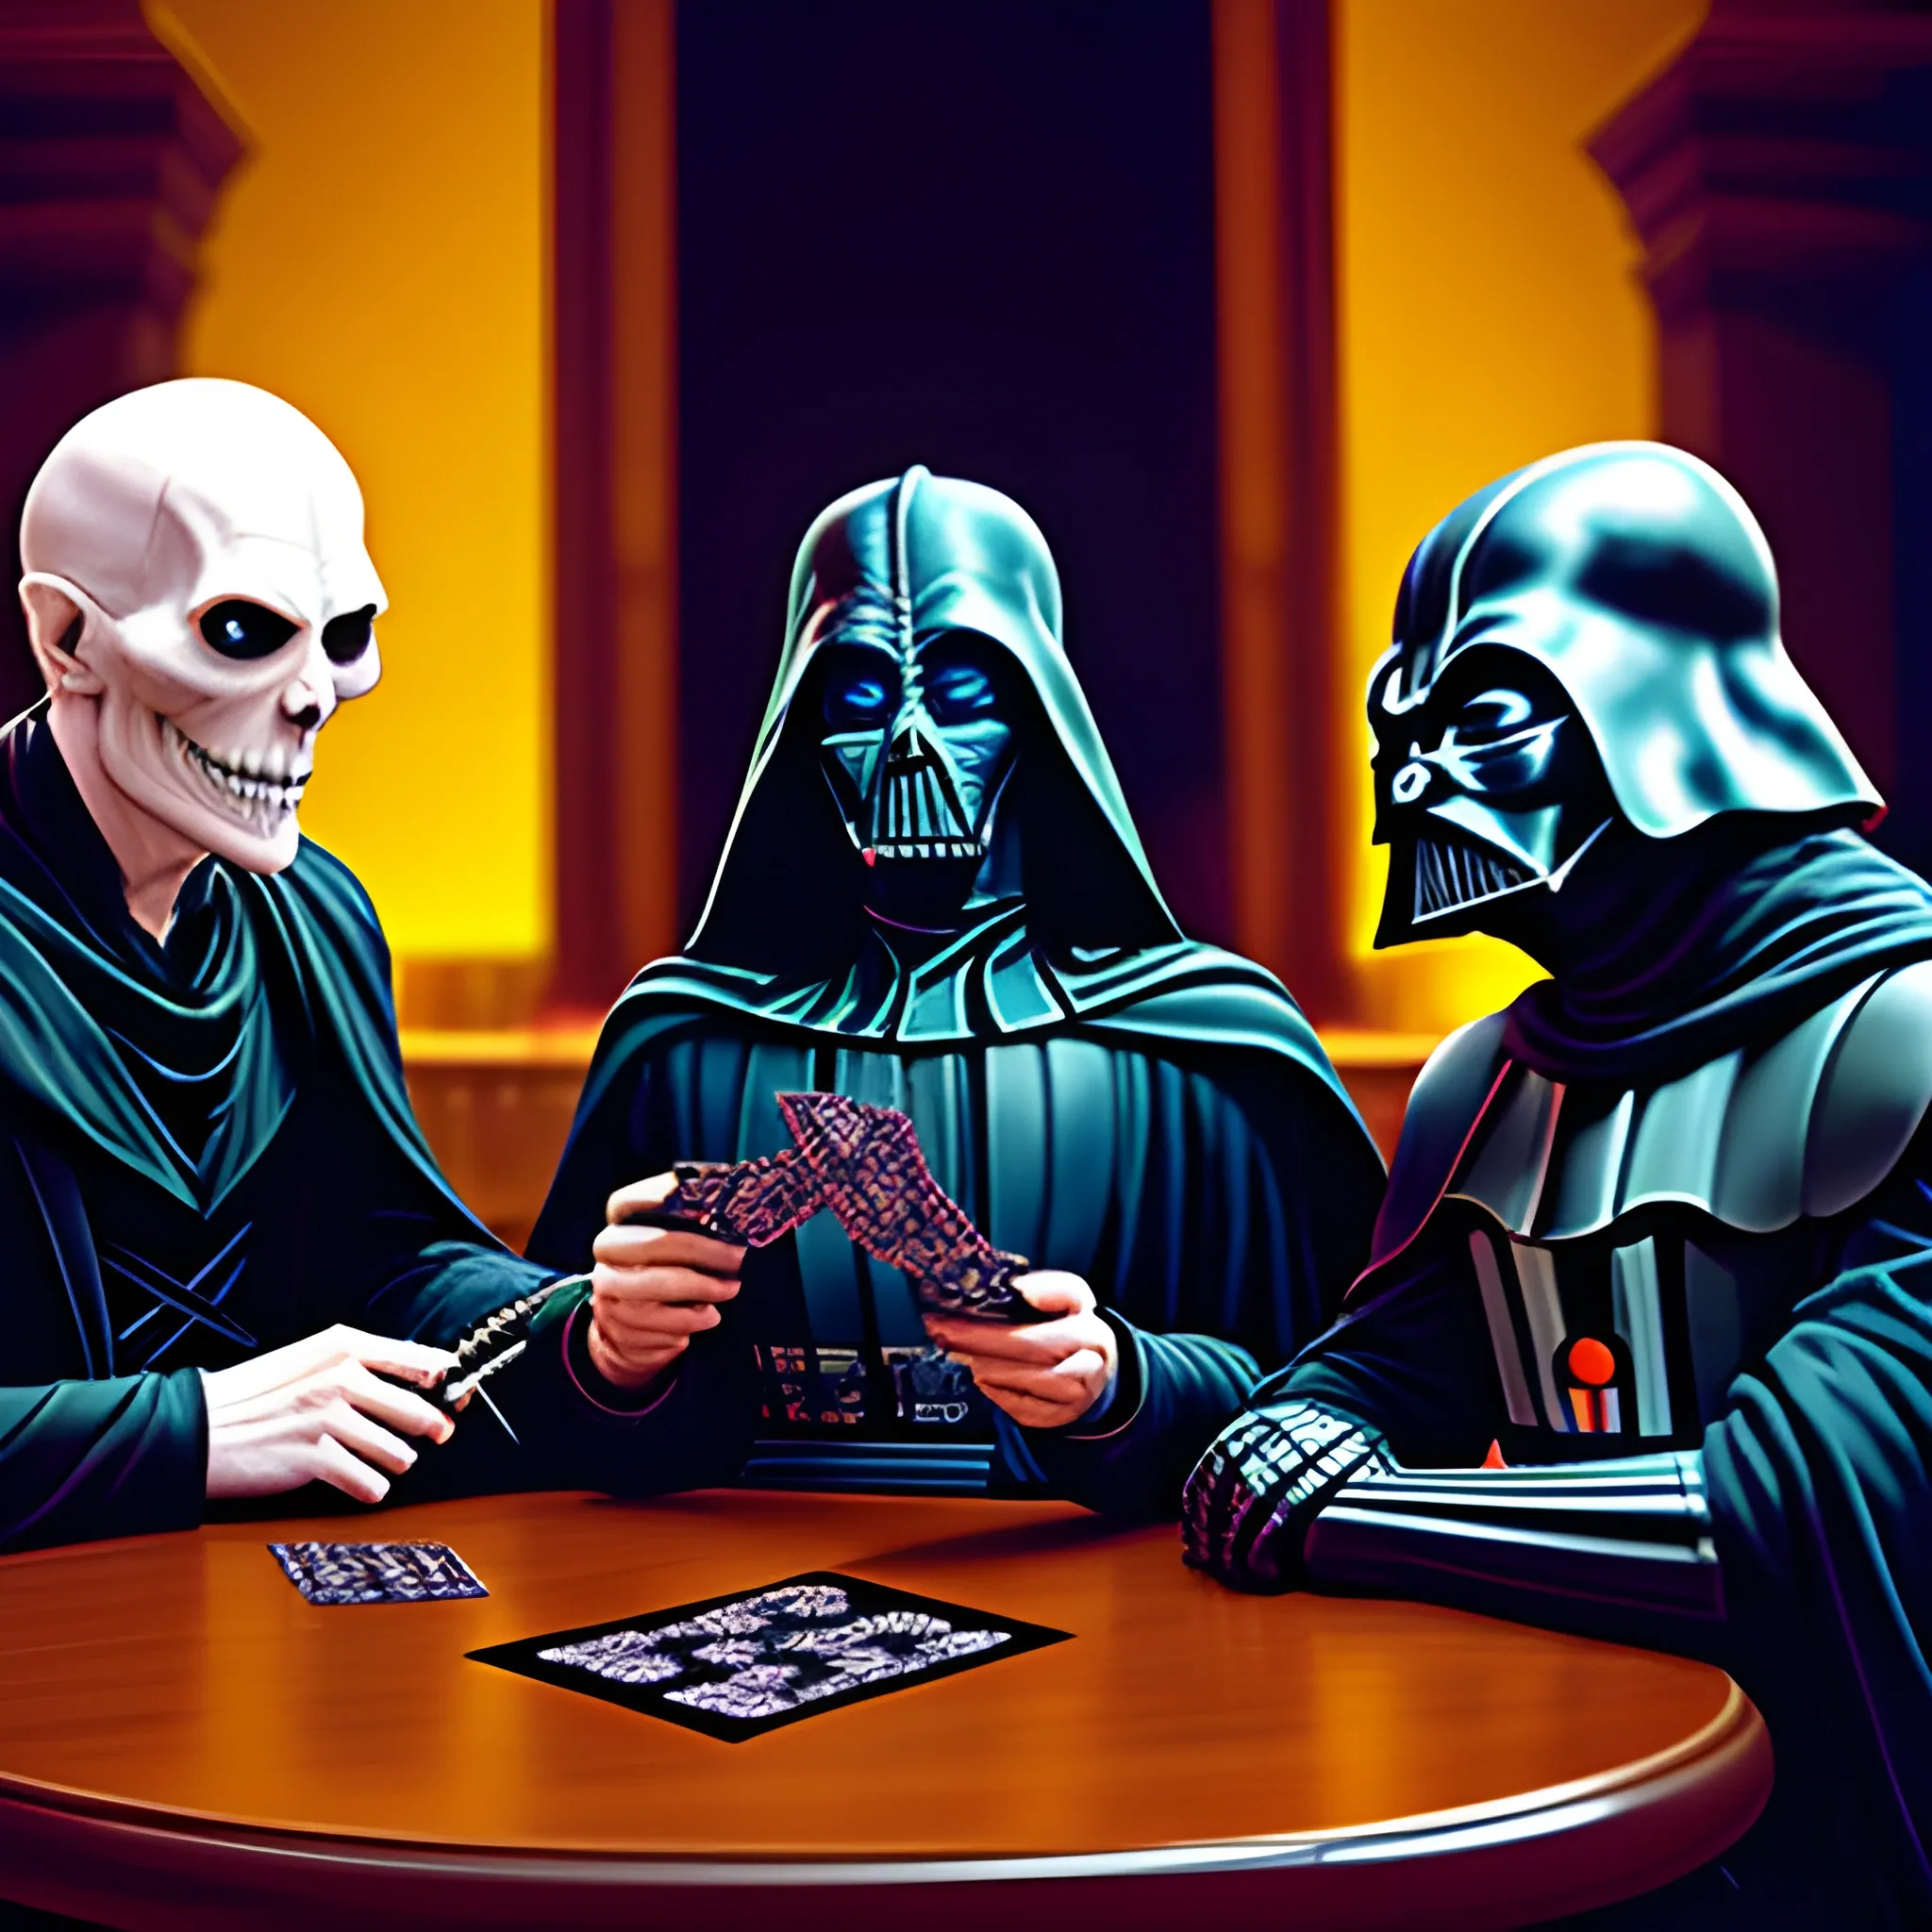 dark vader, lord voldemort and skeletor playing cards in a restaurant